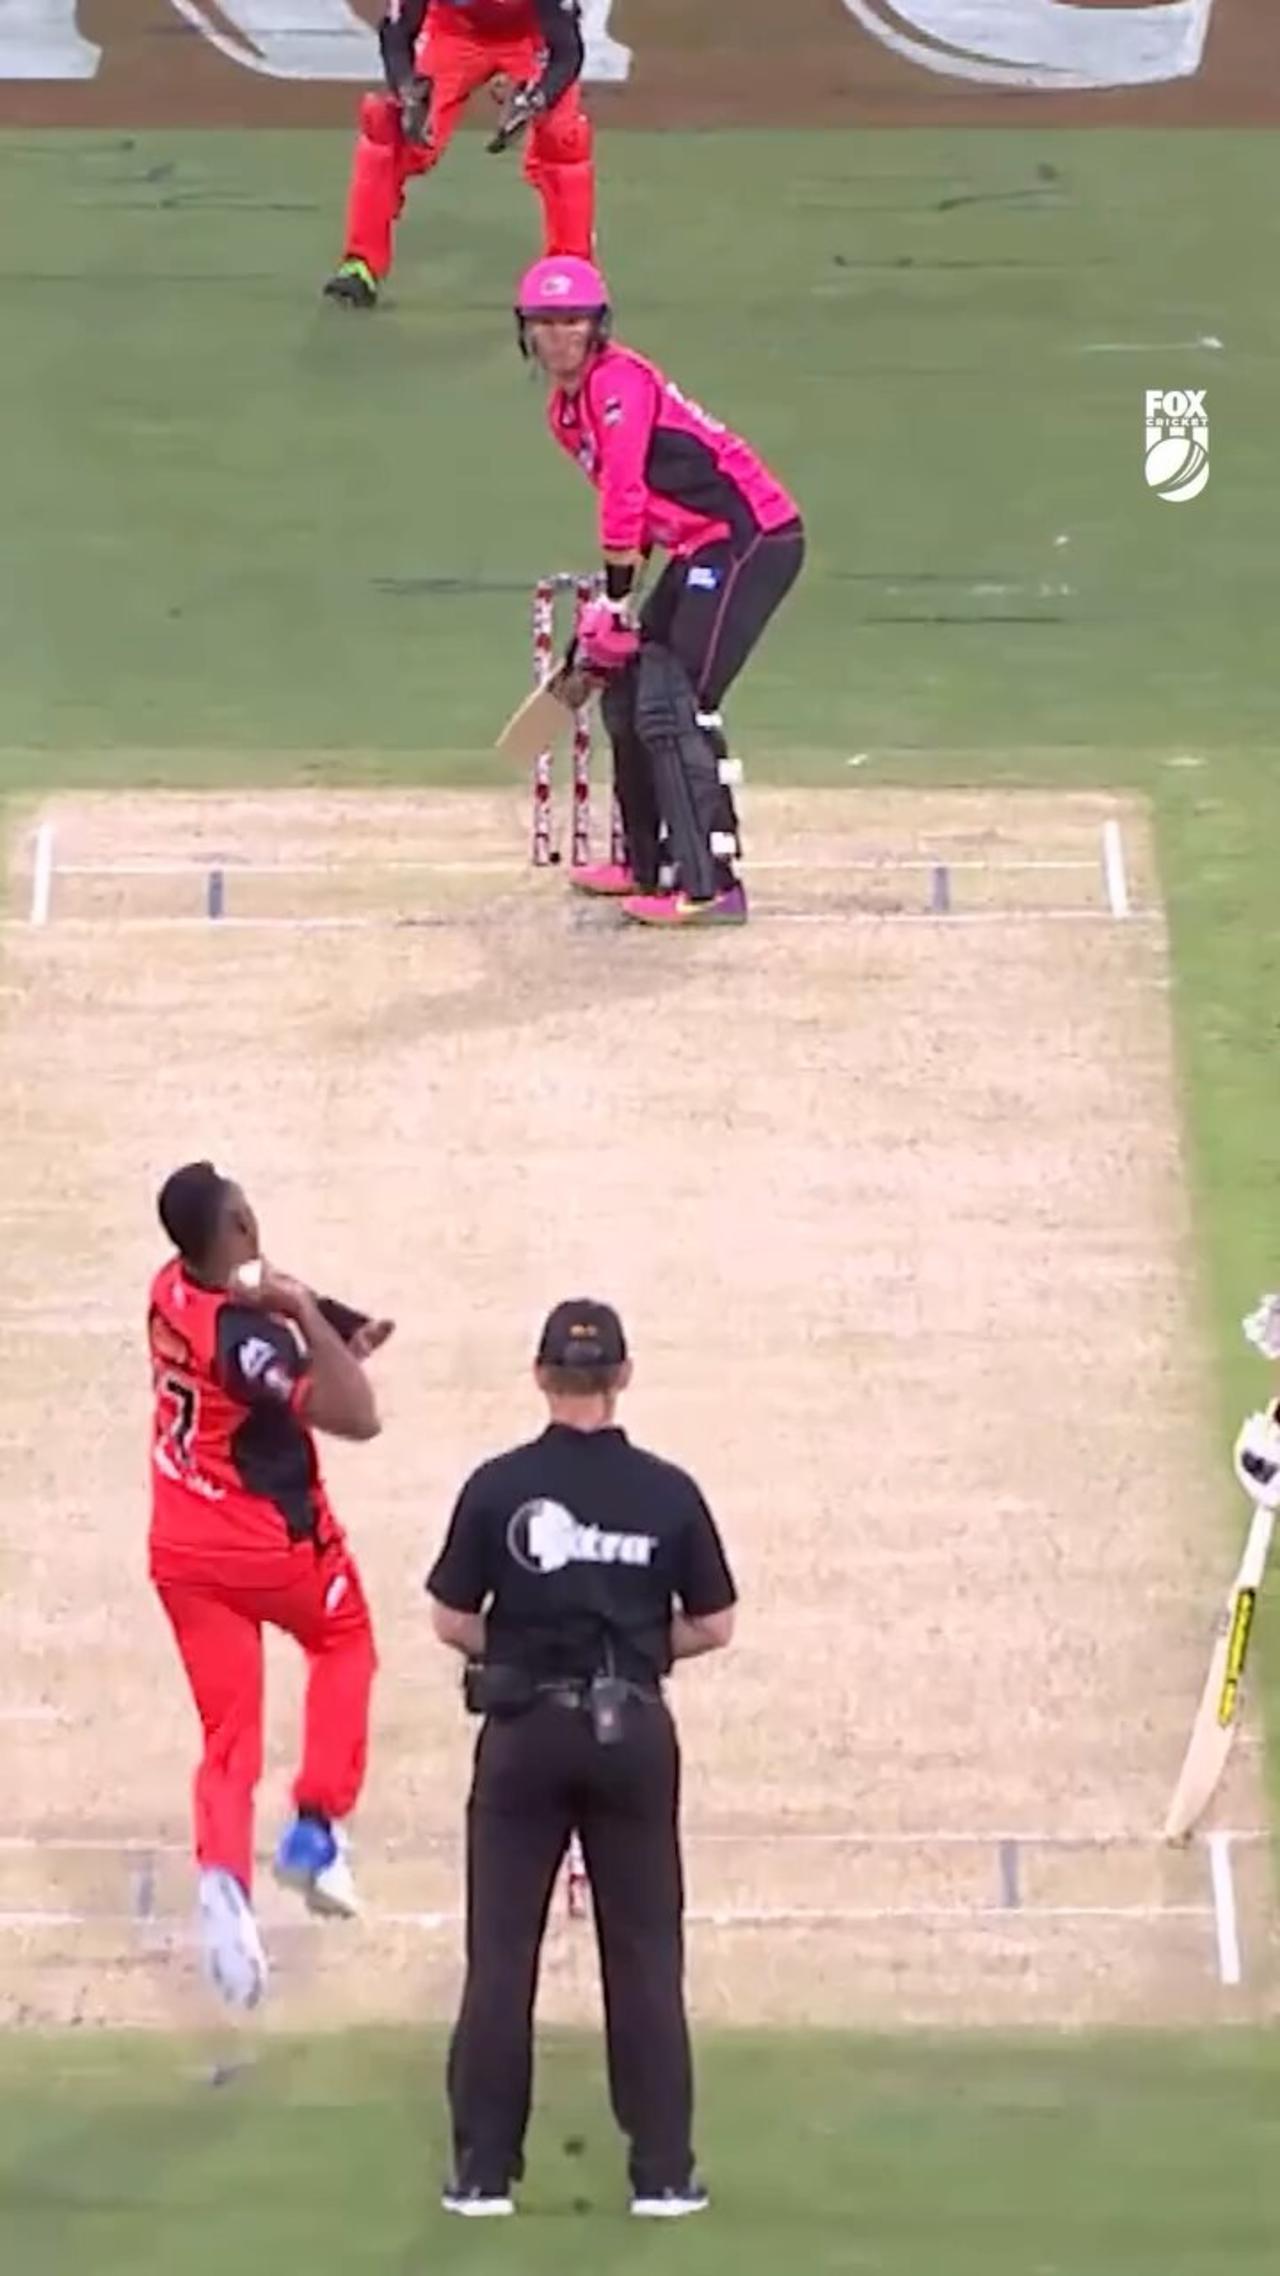 BBL cricket best by security guard